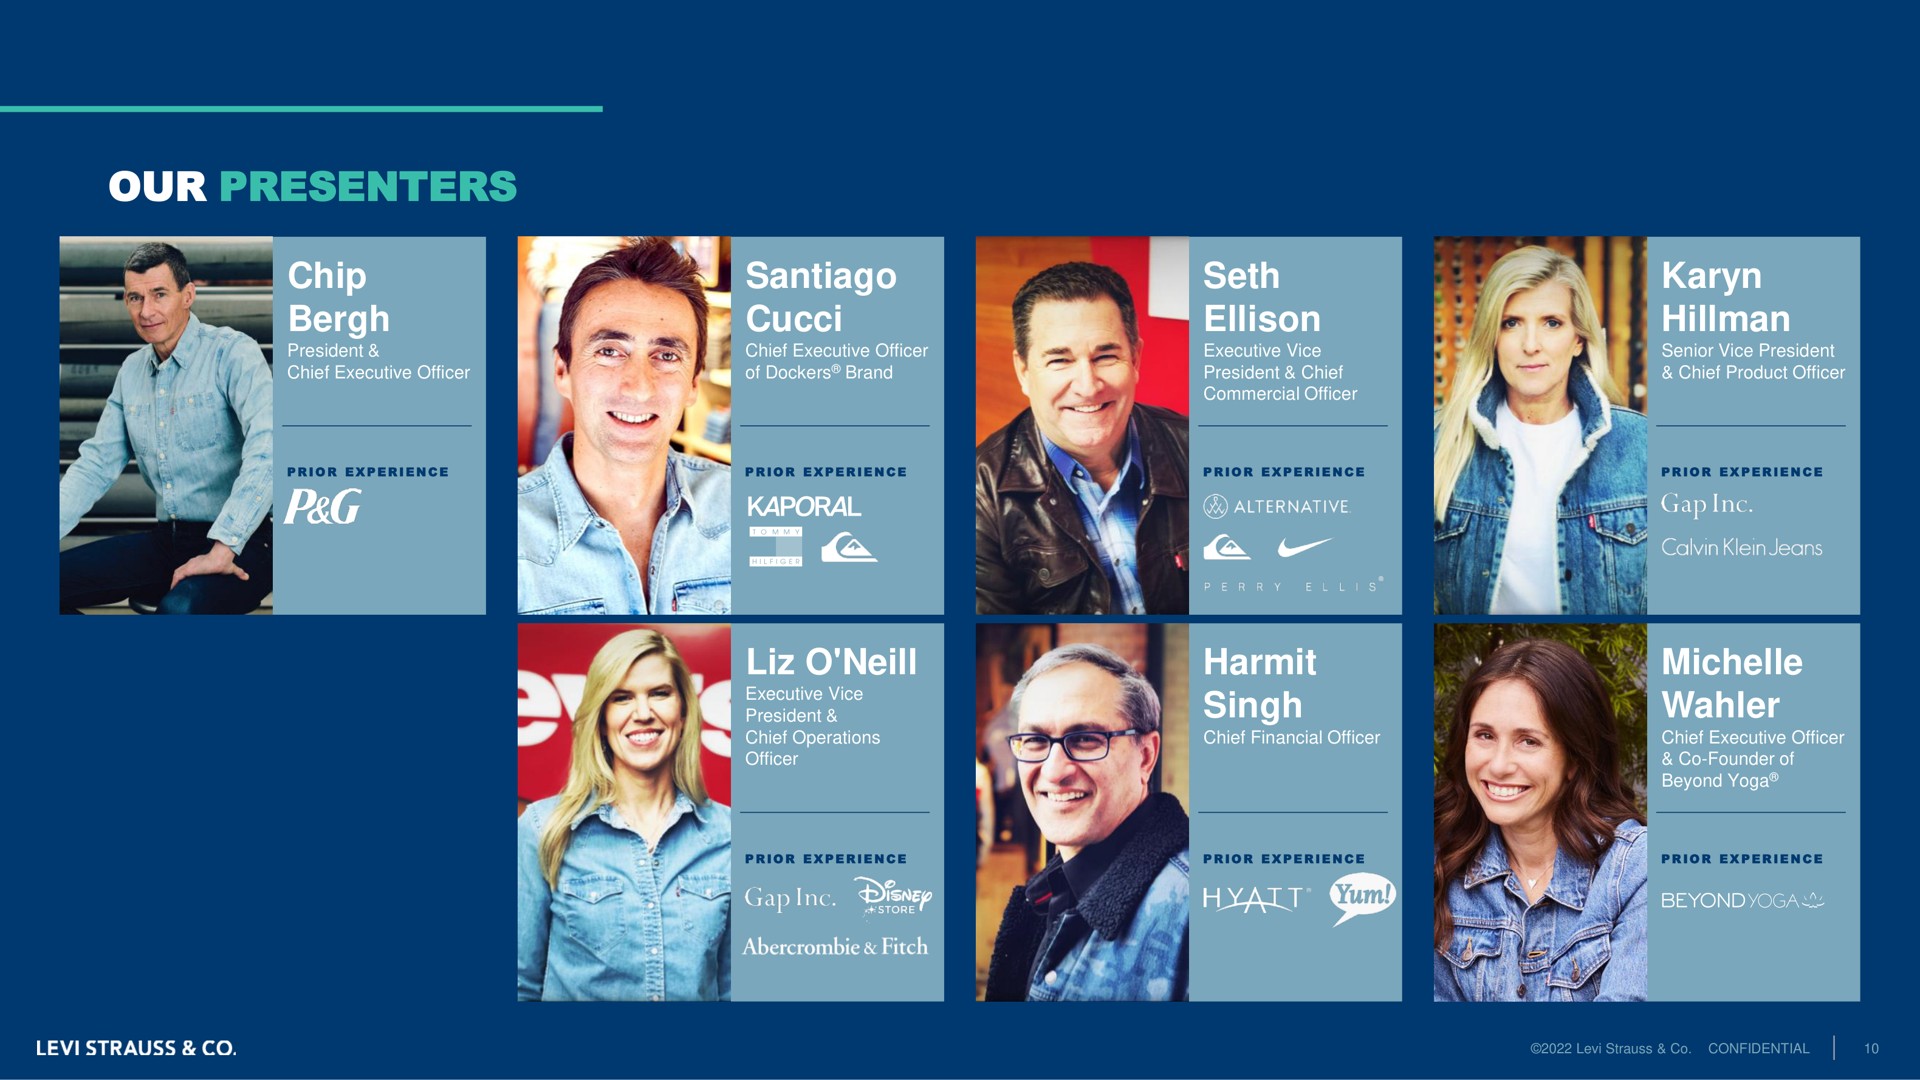 our presenters | Levi Strauss